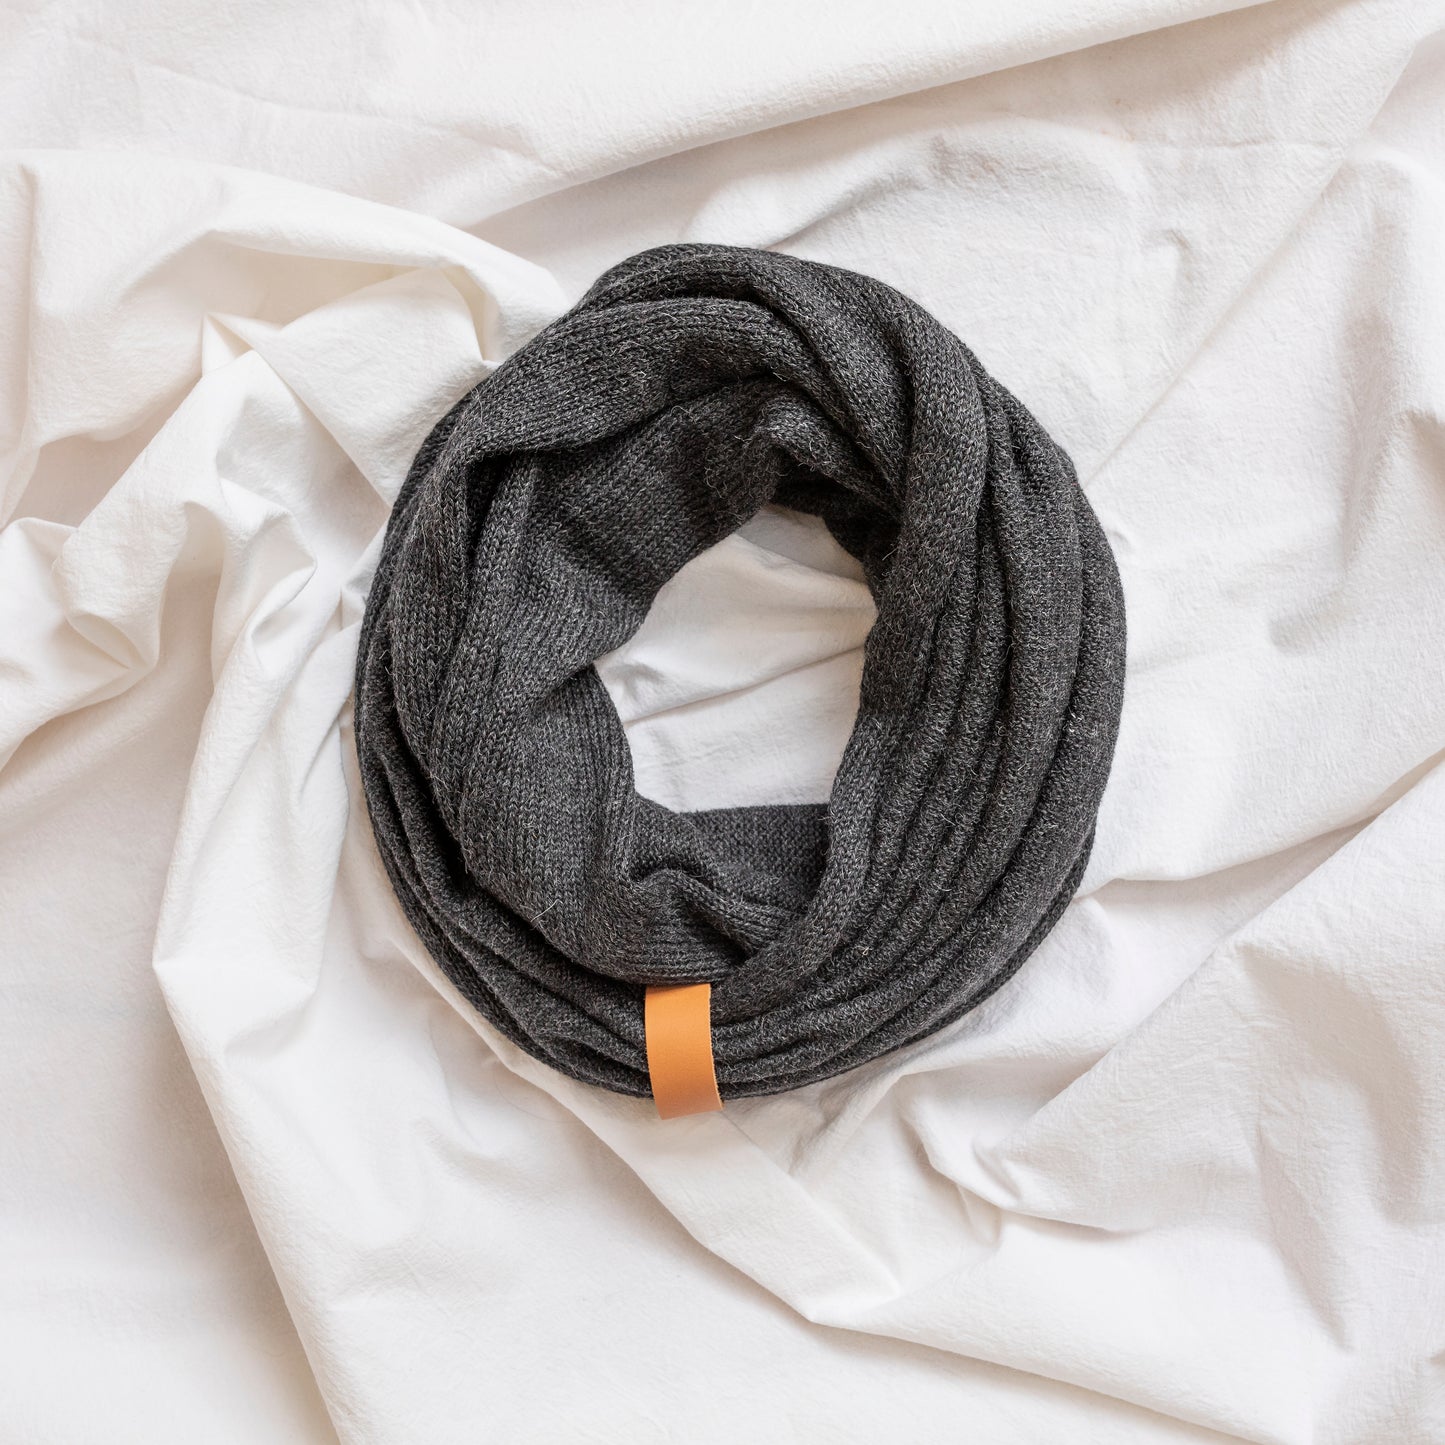 Charcoal coloured luxury infinity scarf with leather strap detail.